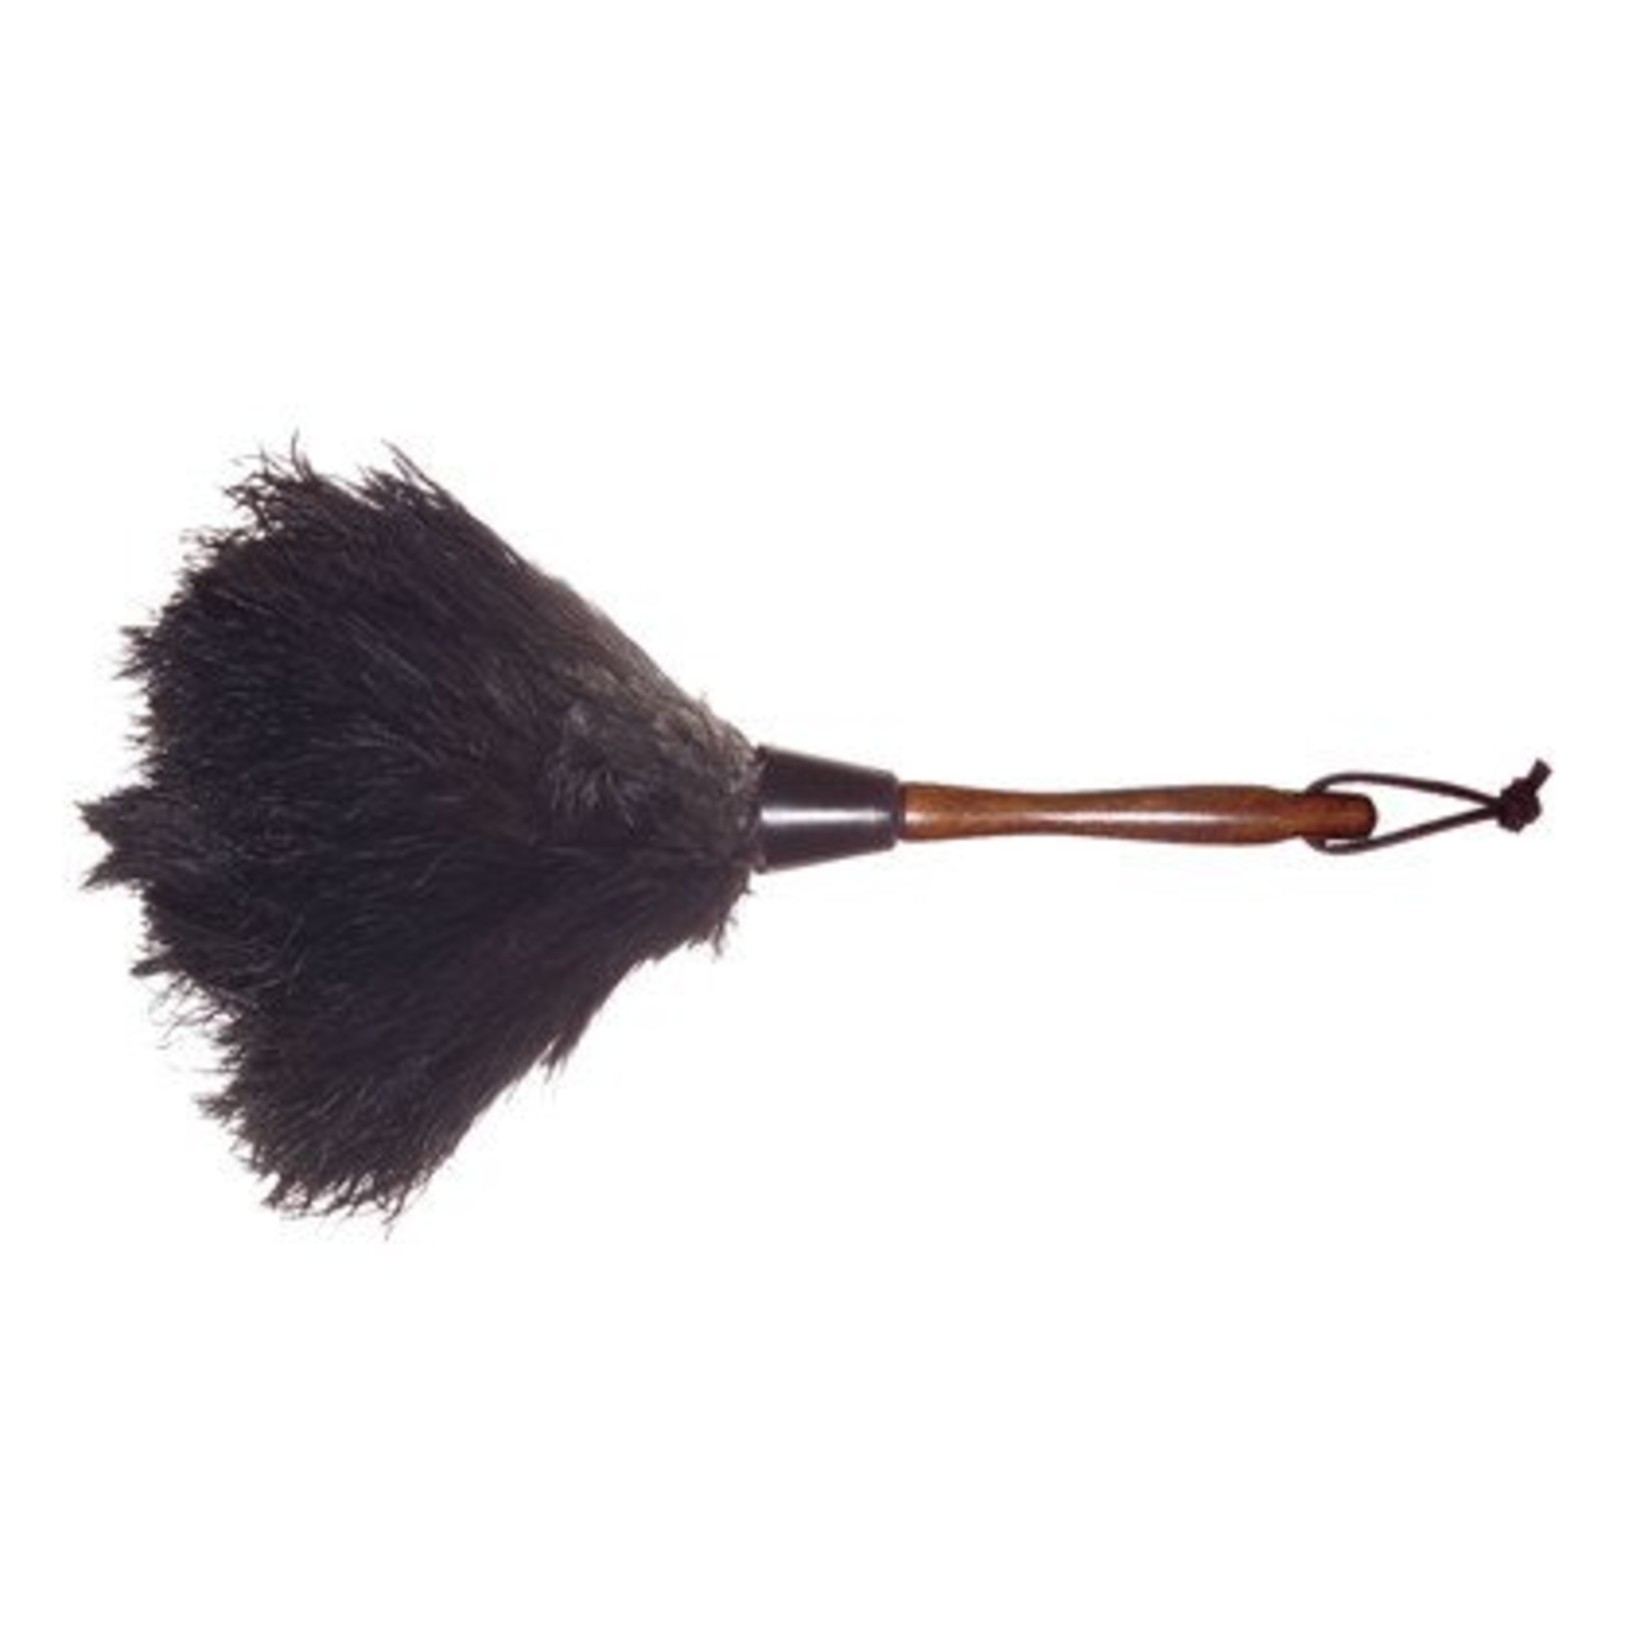 Wool Shop Wool Shop 13" Ostrich Feather Duster